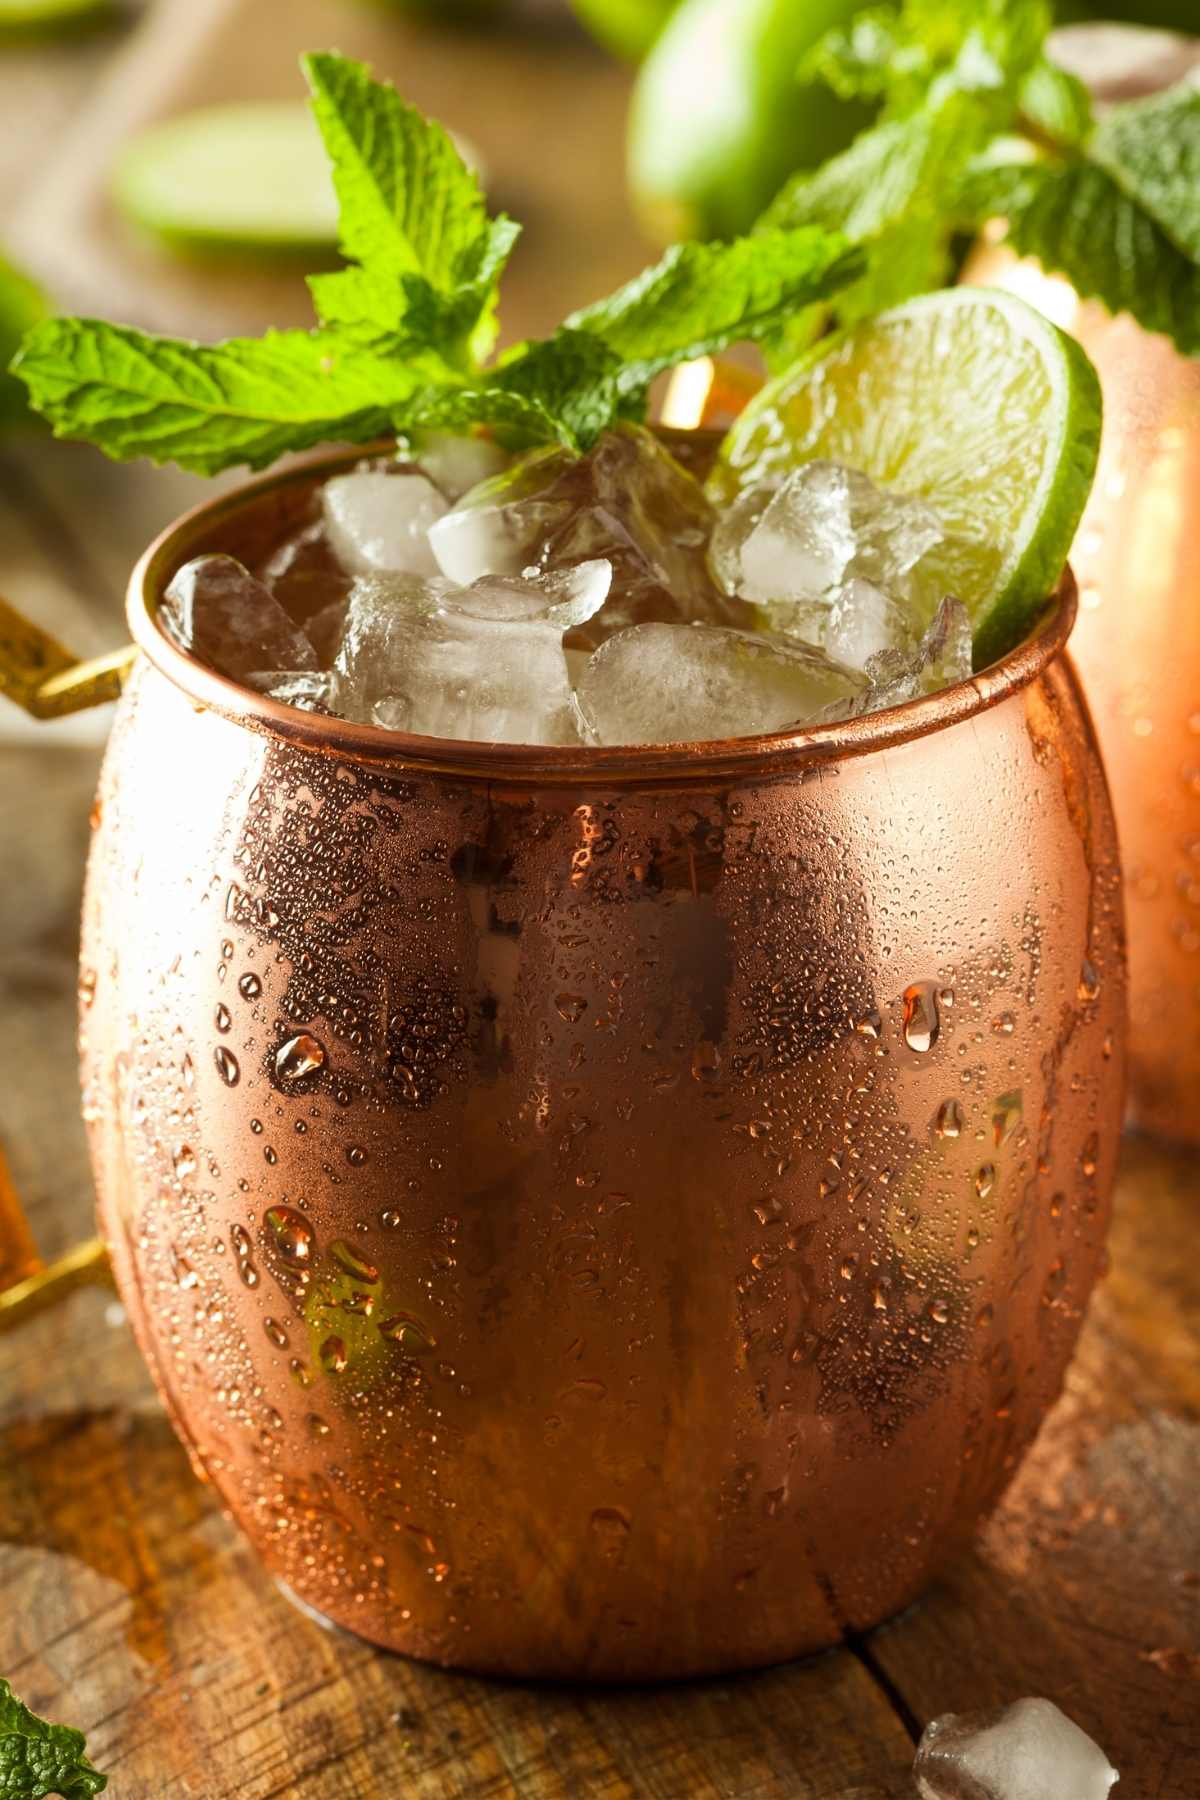 Moscow Mule is a mixed drink that uses vodka, ginger beer, and fresh lime to strike the perfect blend of sweet and spicy. Served over crushed ice, it makes the perfect summer quaff. The ginger flavor also makes it a big hit at holiday celebrations.